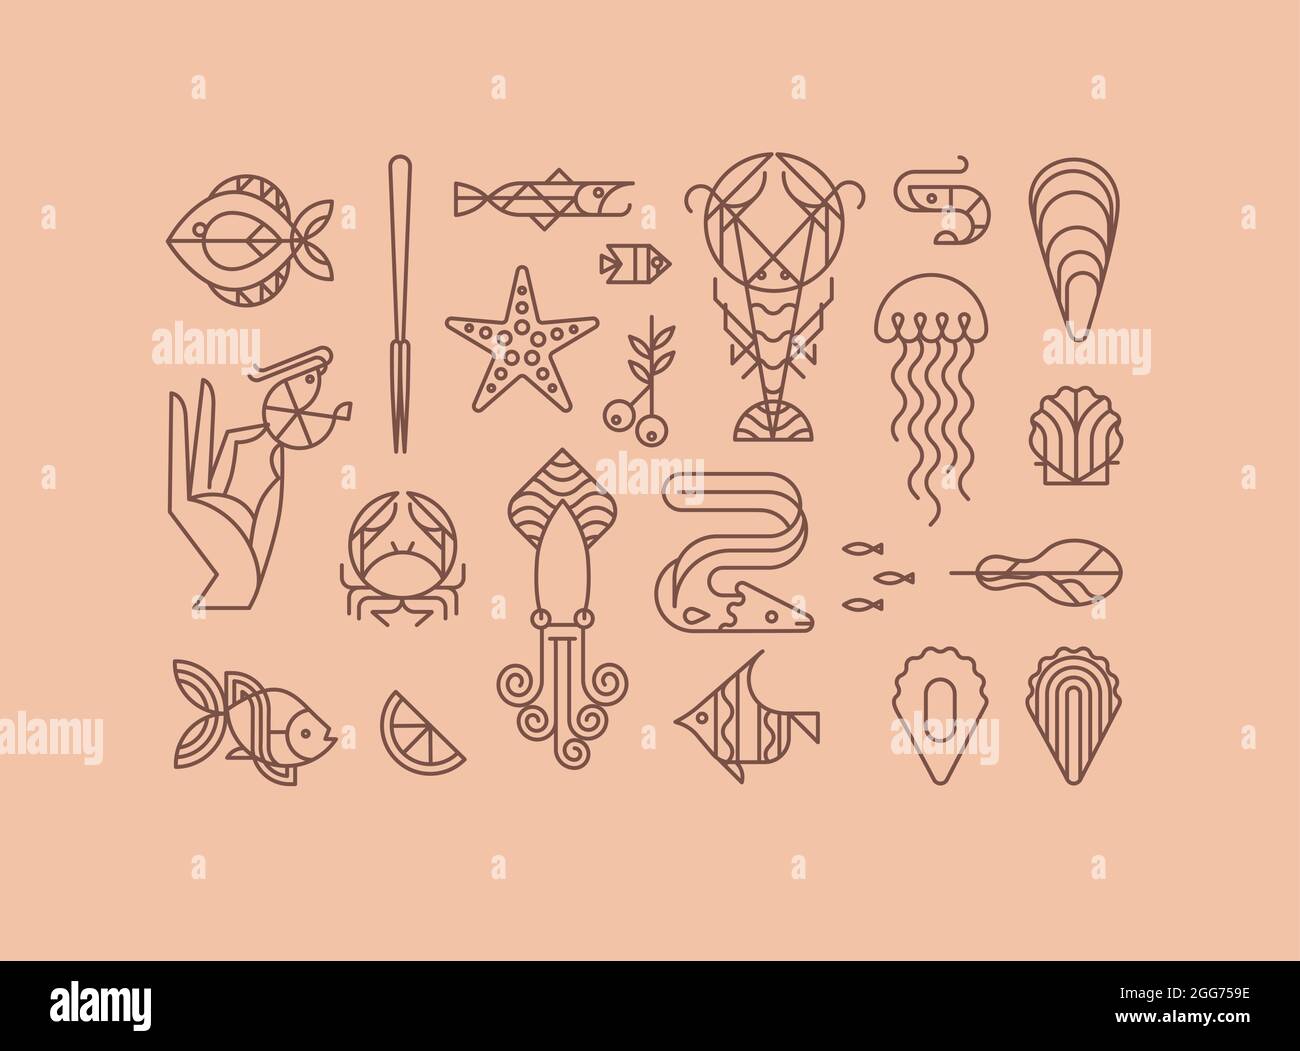 Set of creative modern art deco seafood signs in flat line style drawing on beige background. Stock Vector